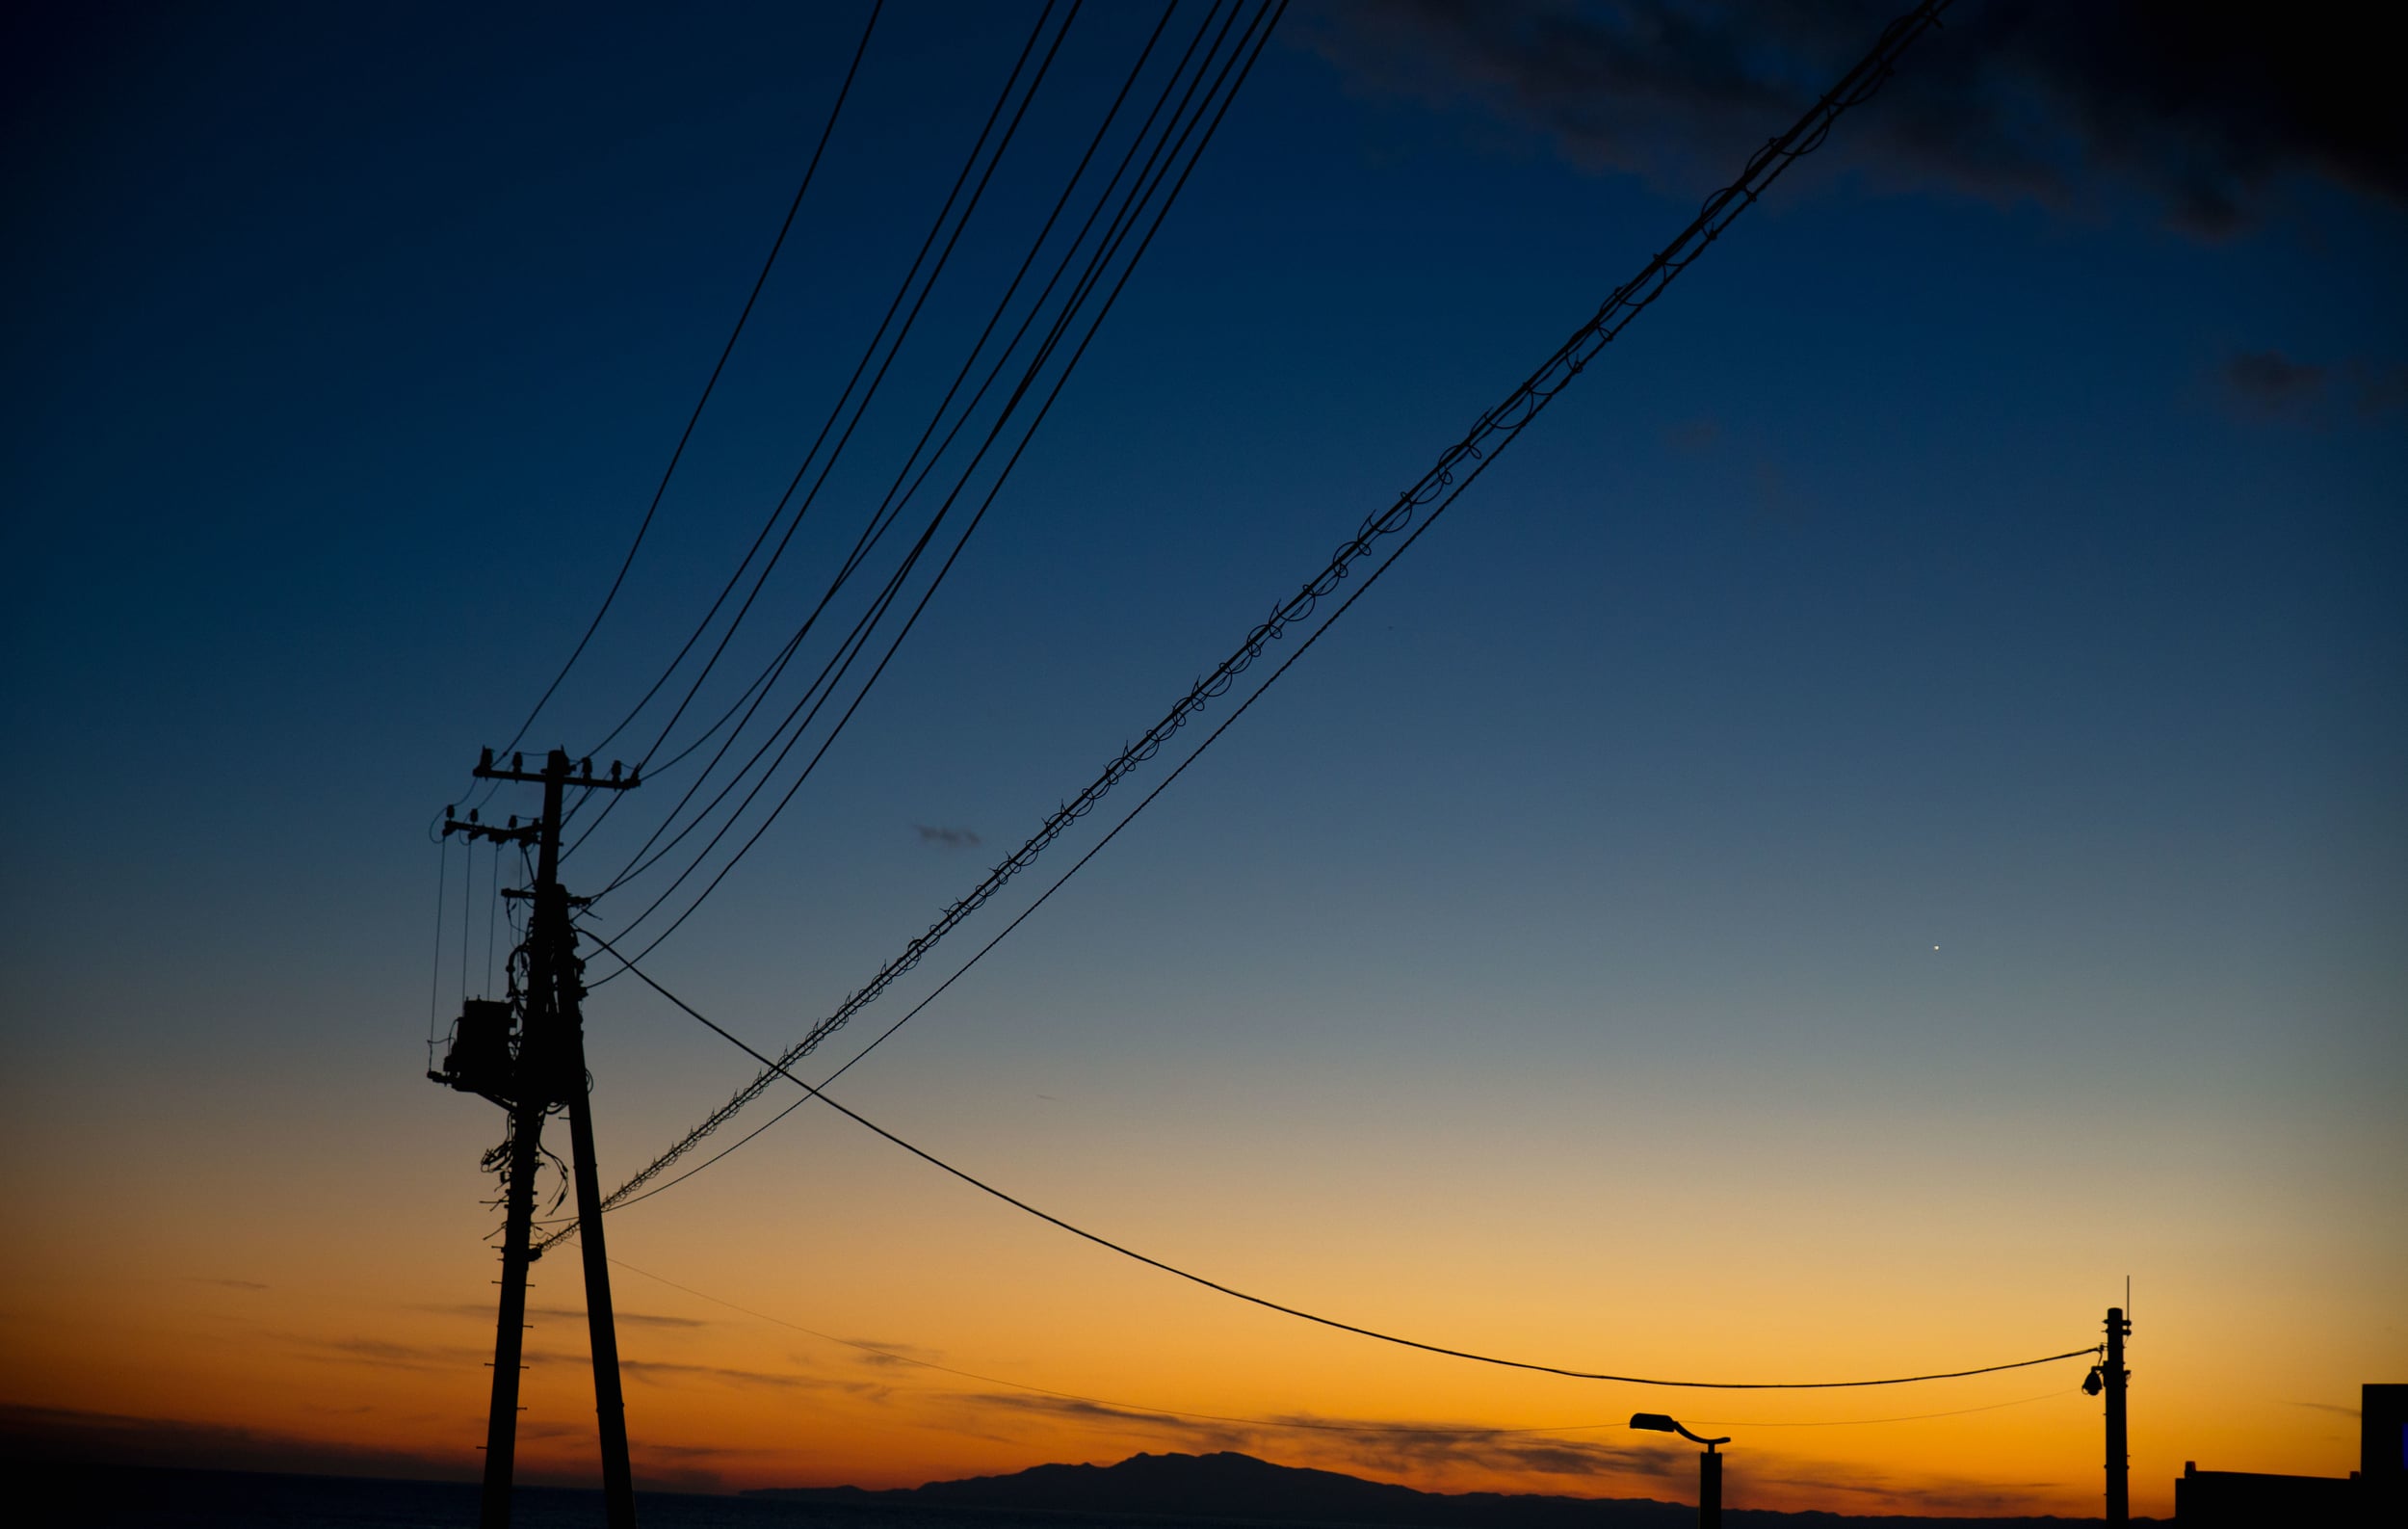 Dawn skies and power lines